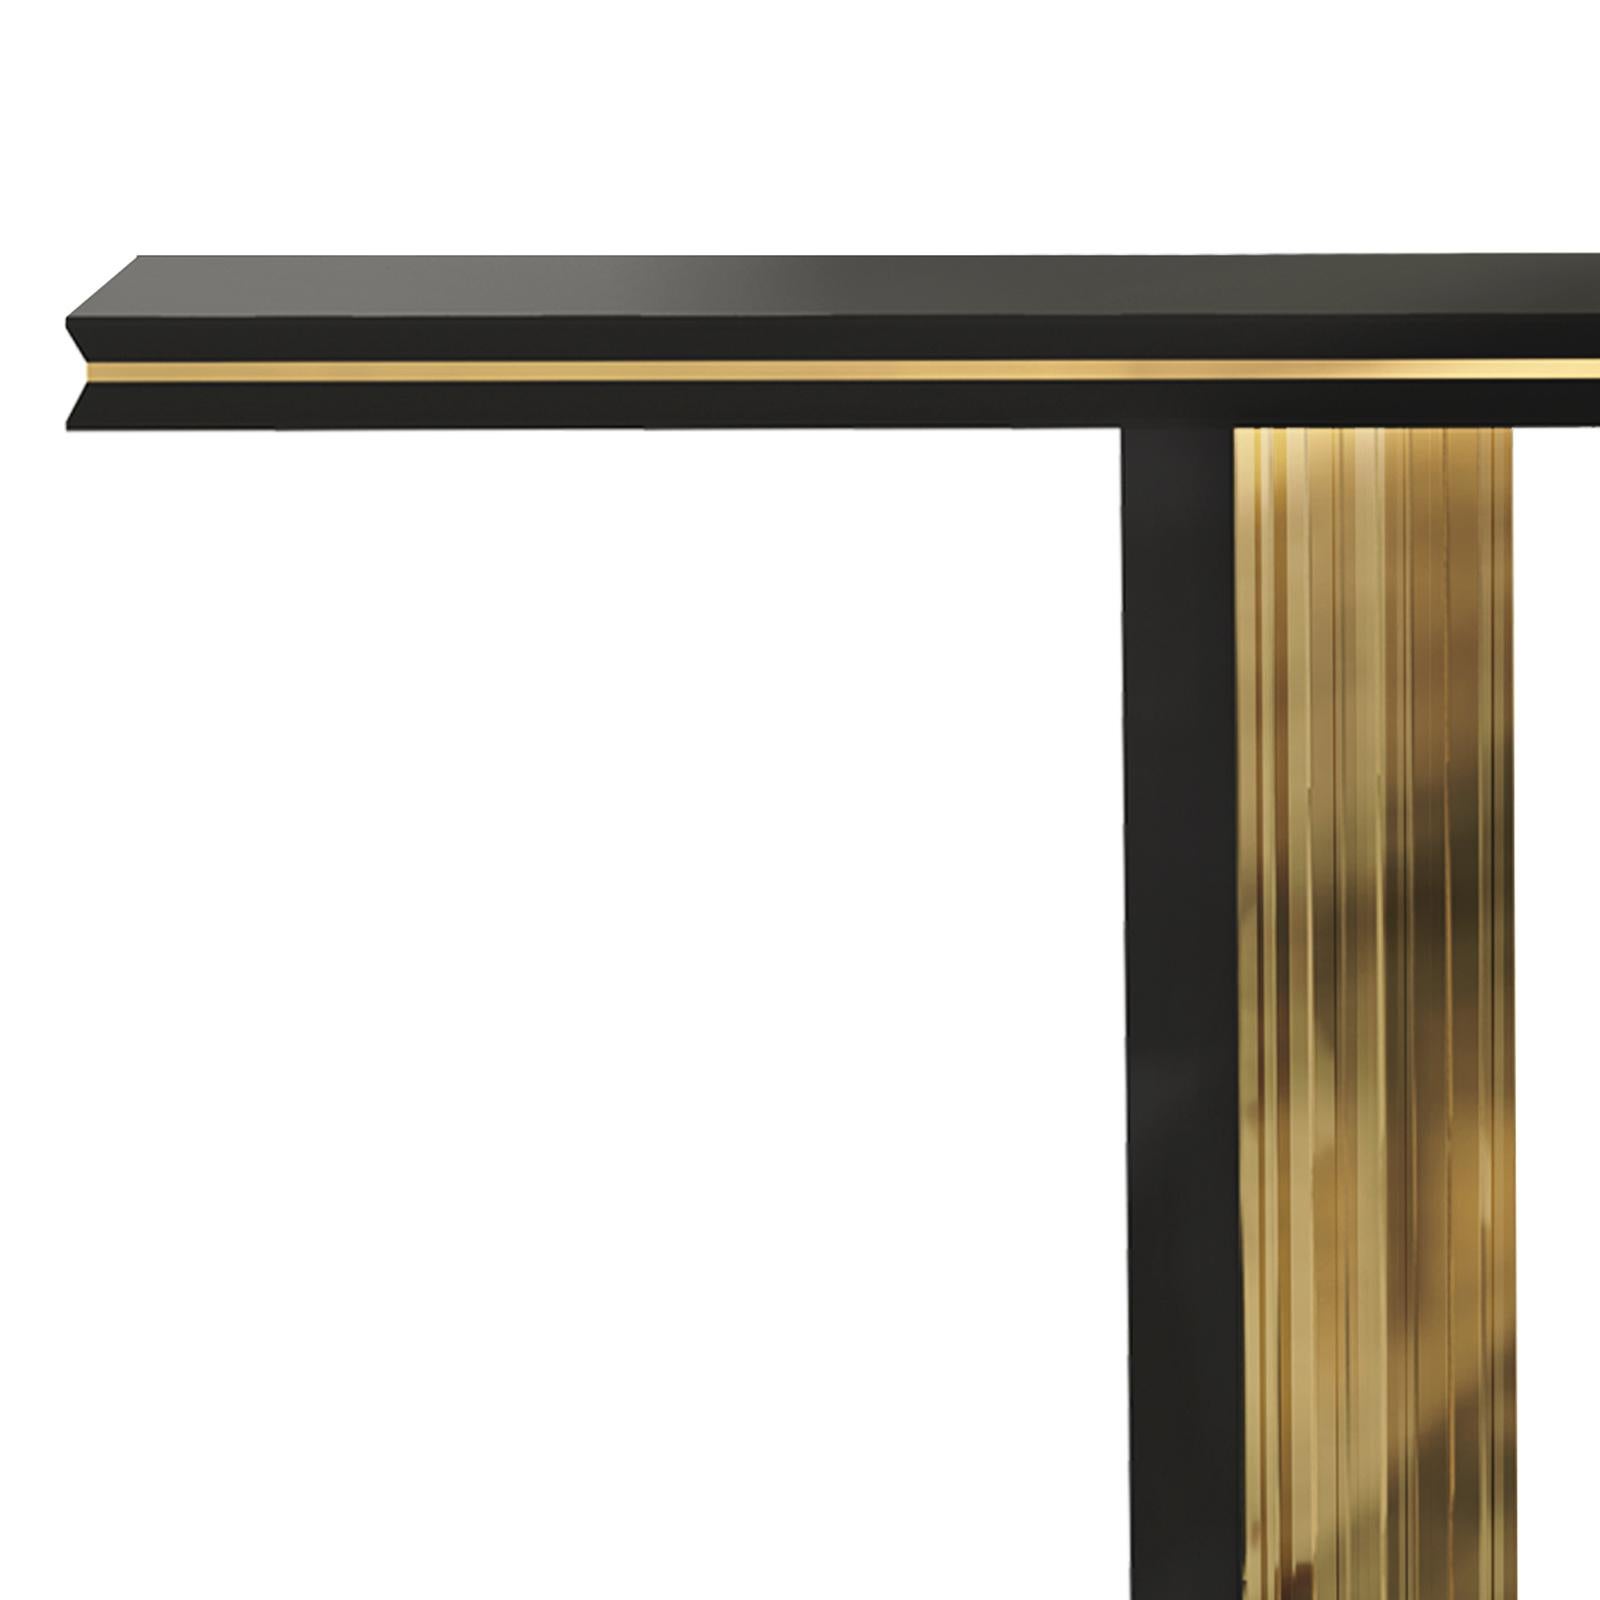 Console Table Maxima with wooden black lacquered
structure and with gold plated solid polished brass.